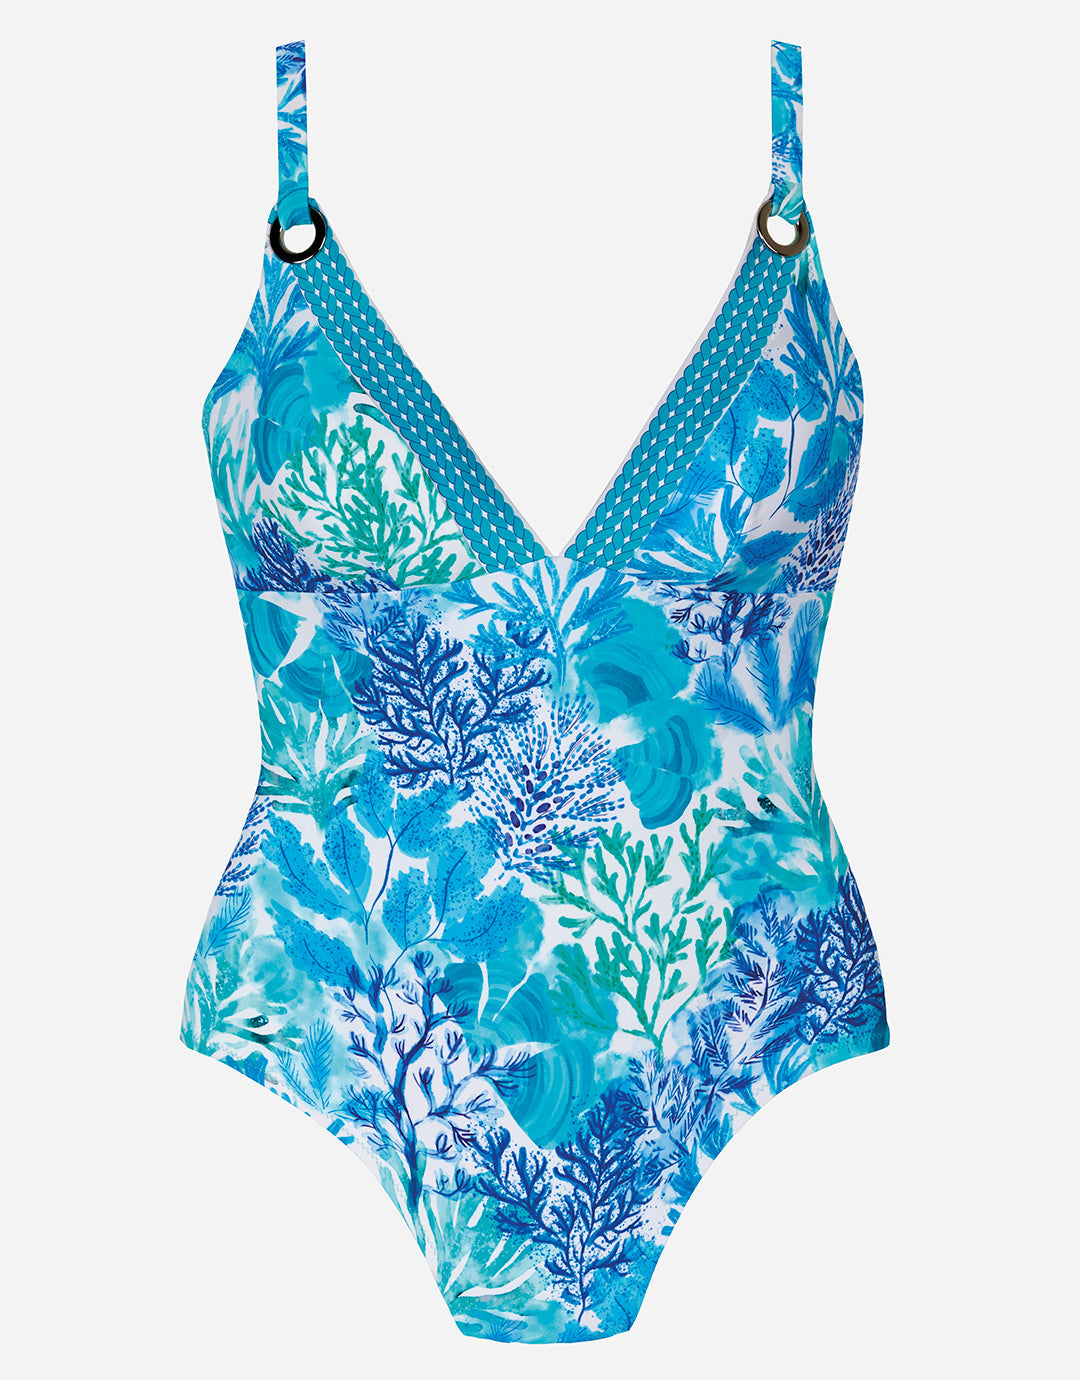 Coral V Neck Swimsuit - Turquoise - Simply Beach UK